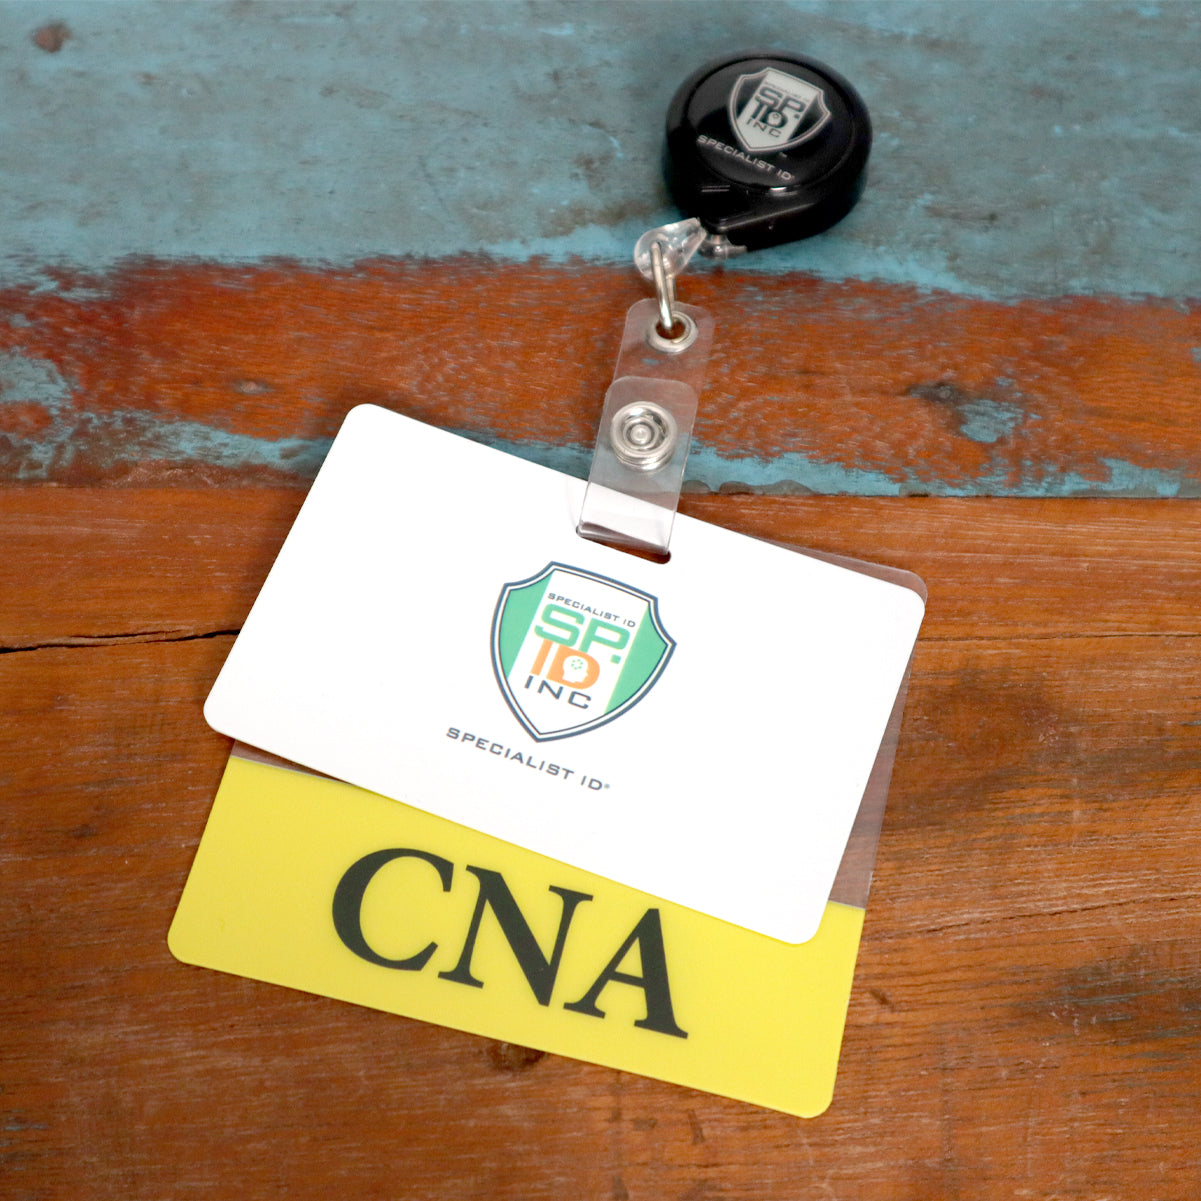 Close-up of a badge reel with two cards attached: one with the logo "SP inc" and another with "Clear CNA Badge Buddy - Horizontal ID Badge Backer for Nursing Assistant - Double Sided Print" in bold letters. The badges, perfect for nurse assistants, rest on a wooden surface.